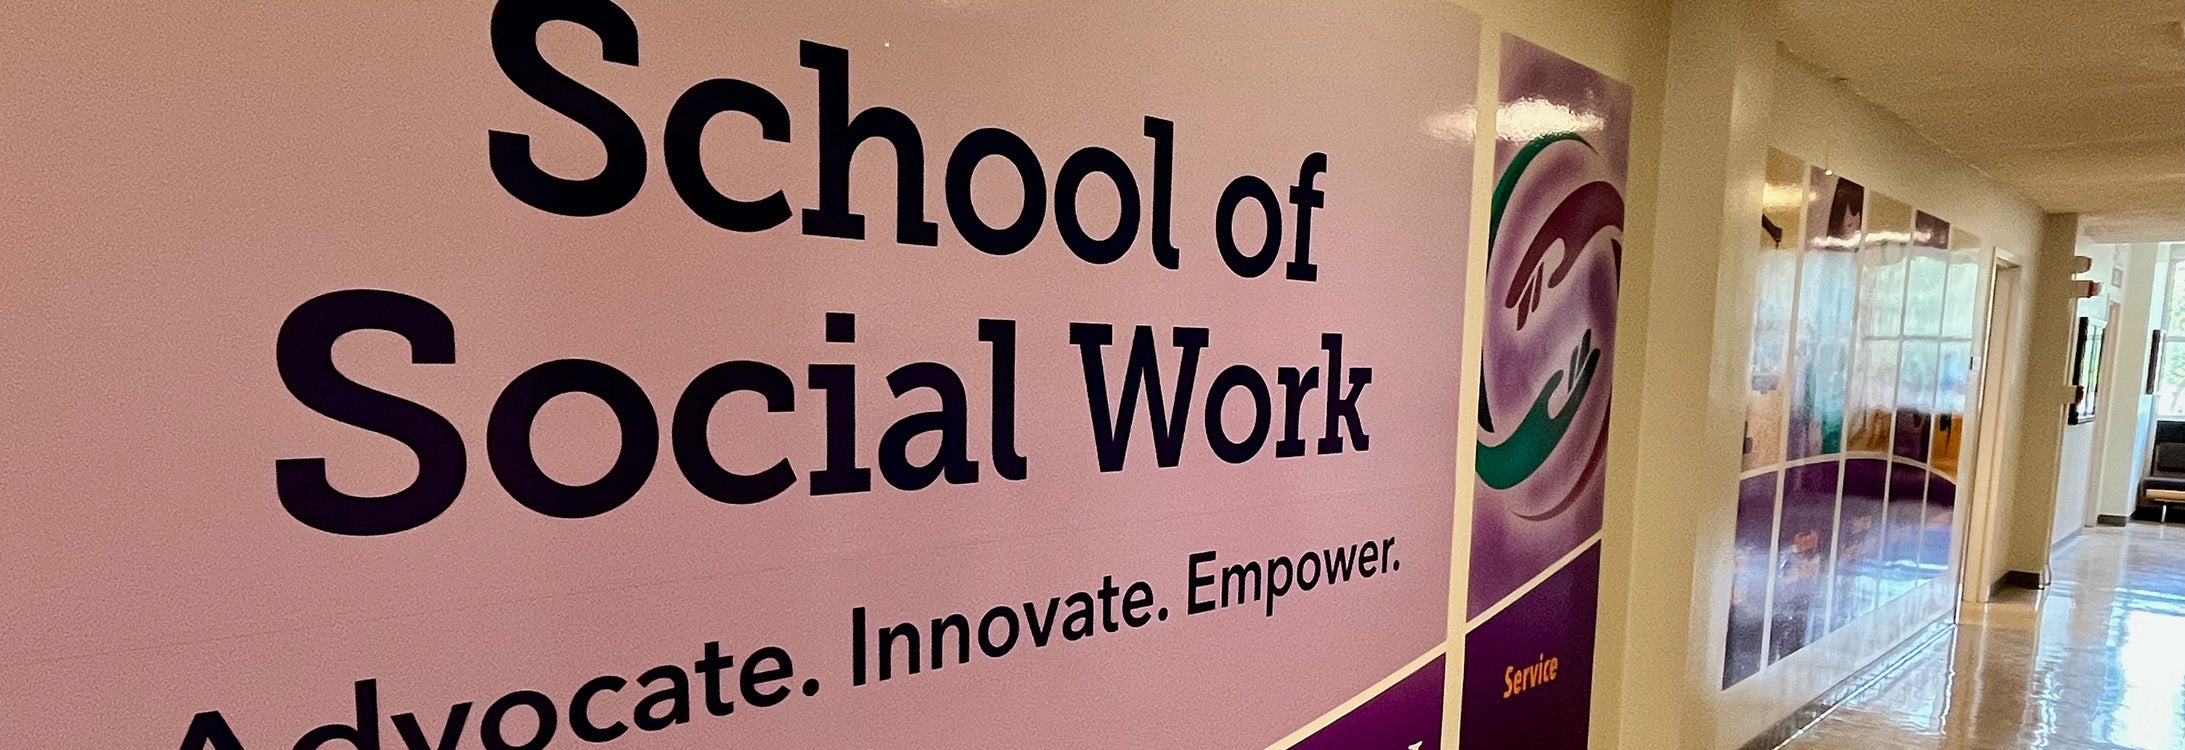 The ECU School of Social graphic in the Rivers Building. (Photo by Ronnie Woodward)